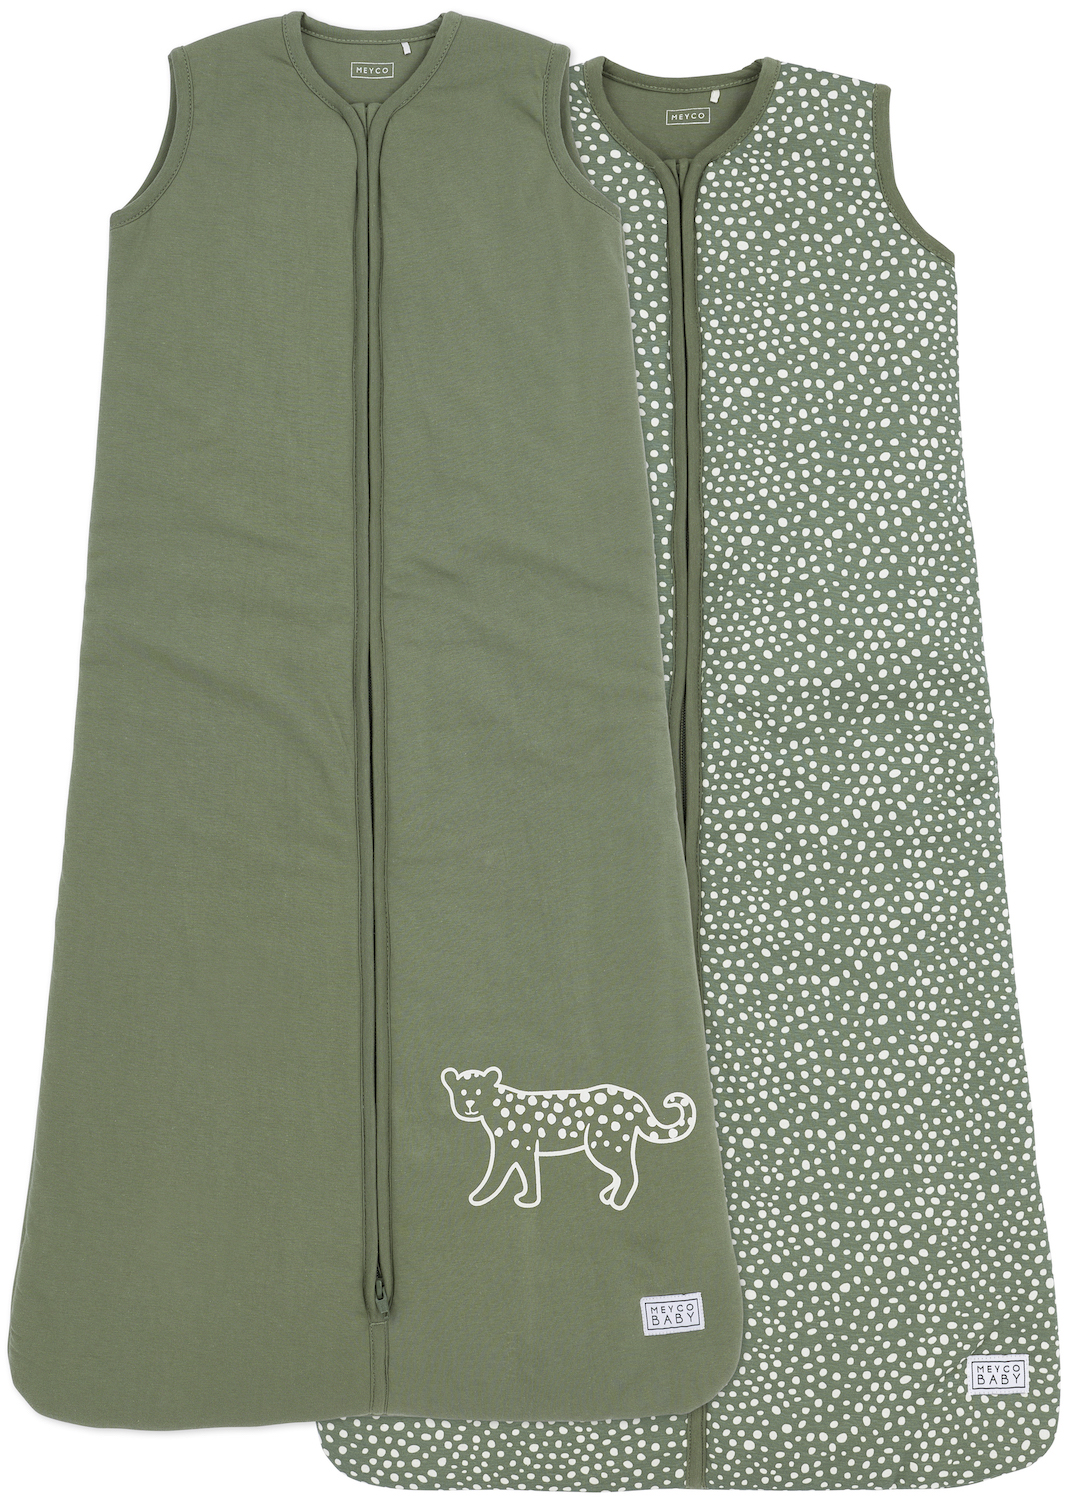 Baby sleeping bag lined 2-pack Cheetah – Forest Green – 110cm